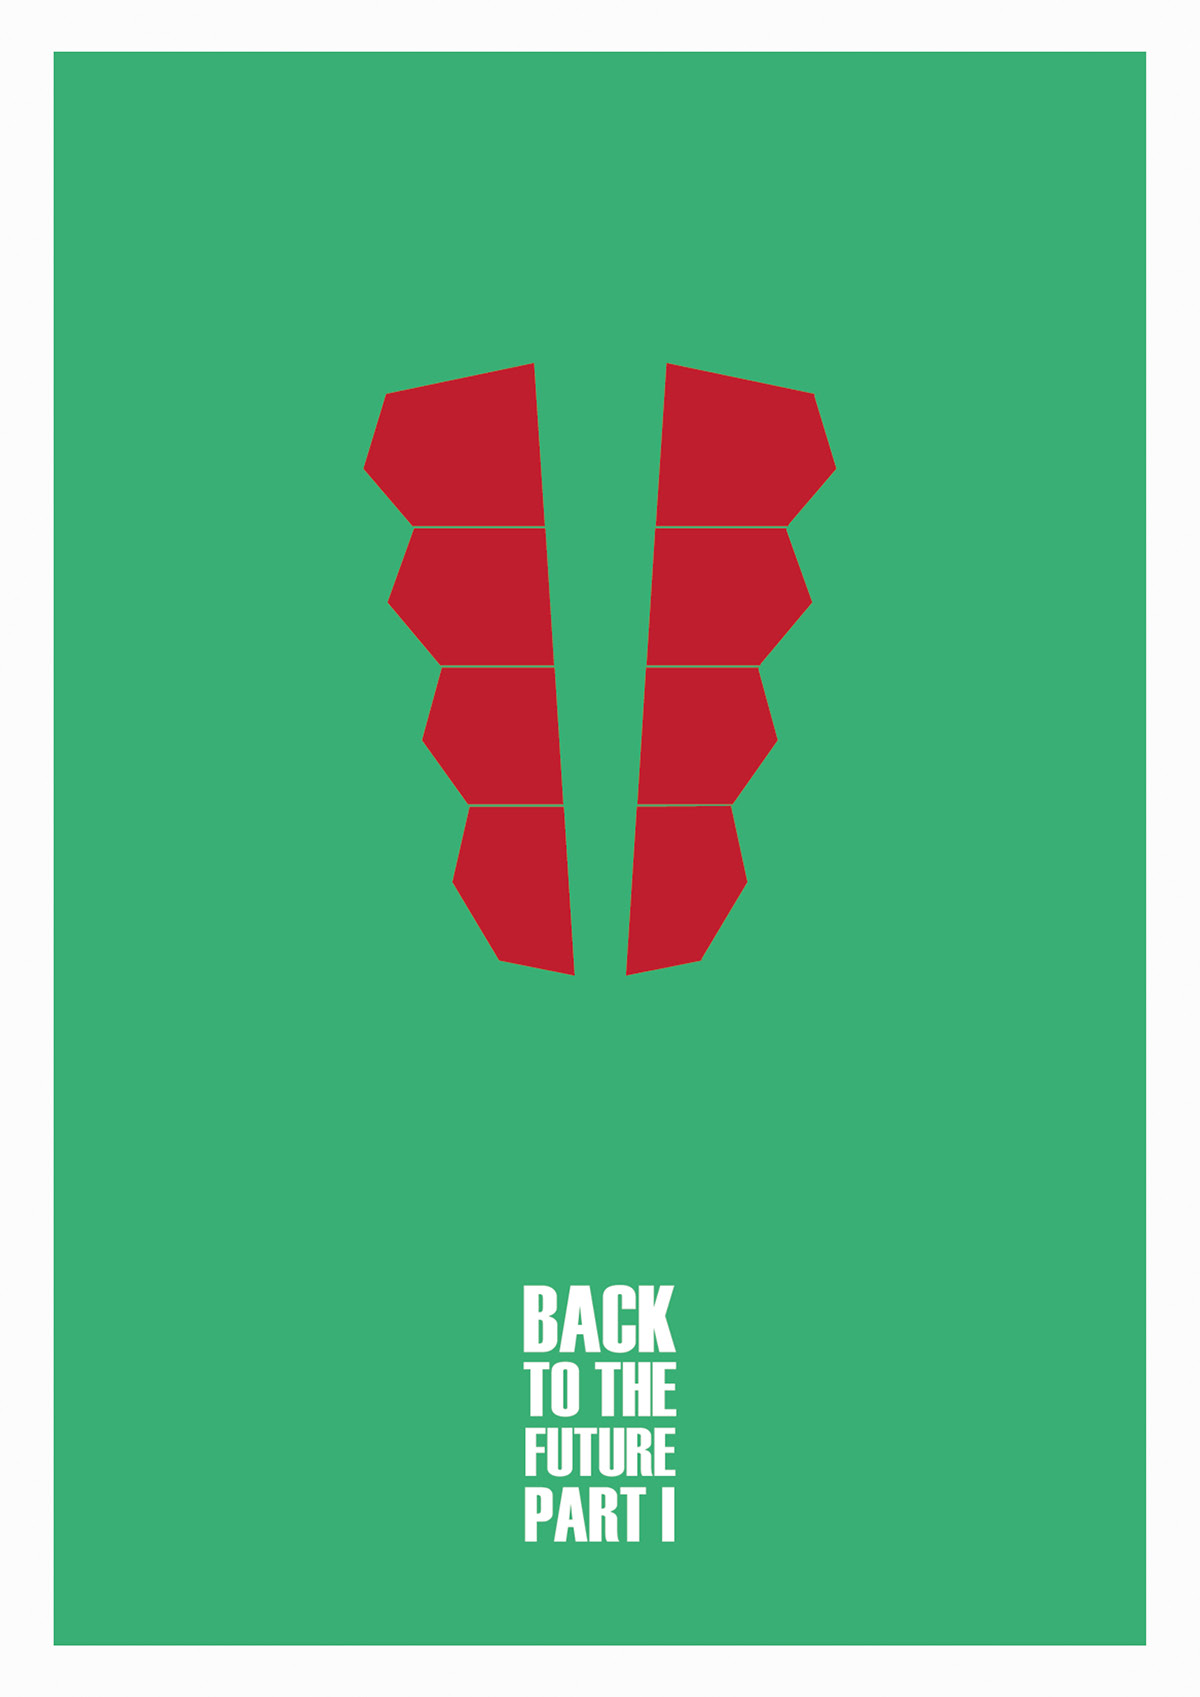 Minimalist Movies Posters batman back to the future Poster Design